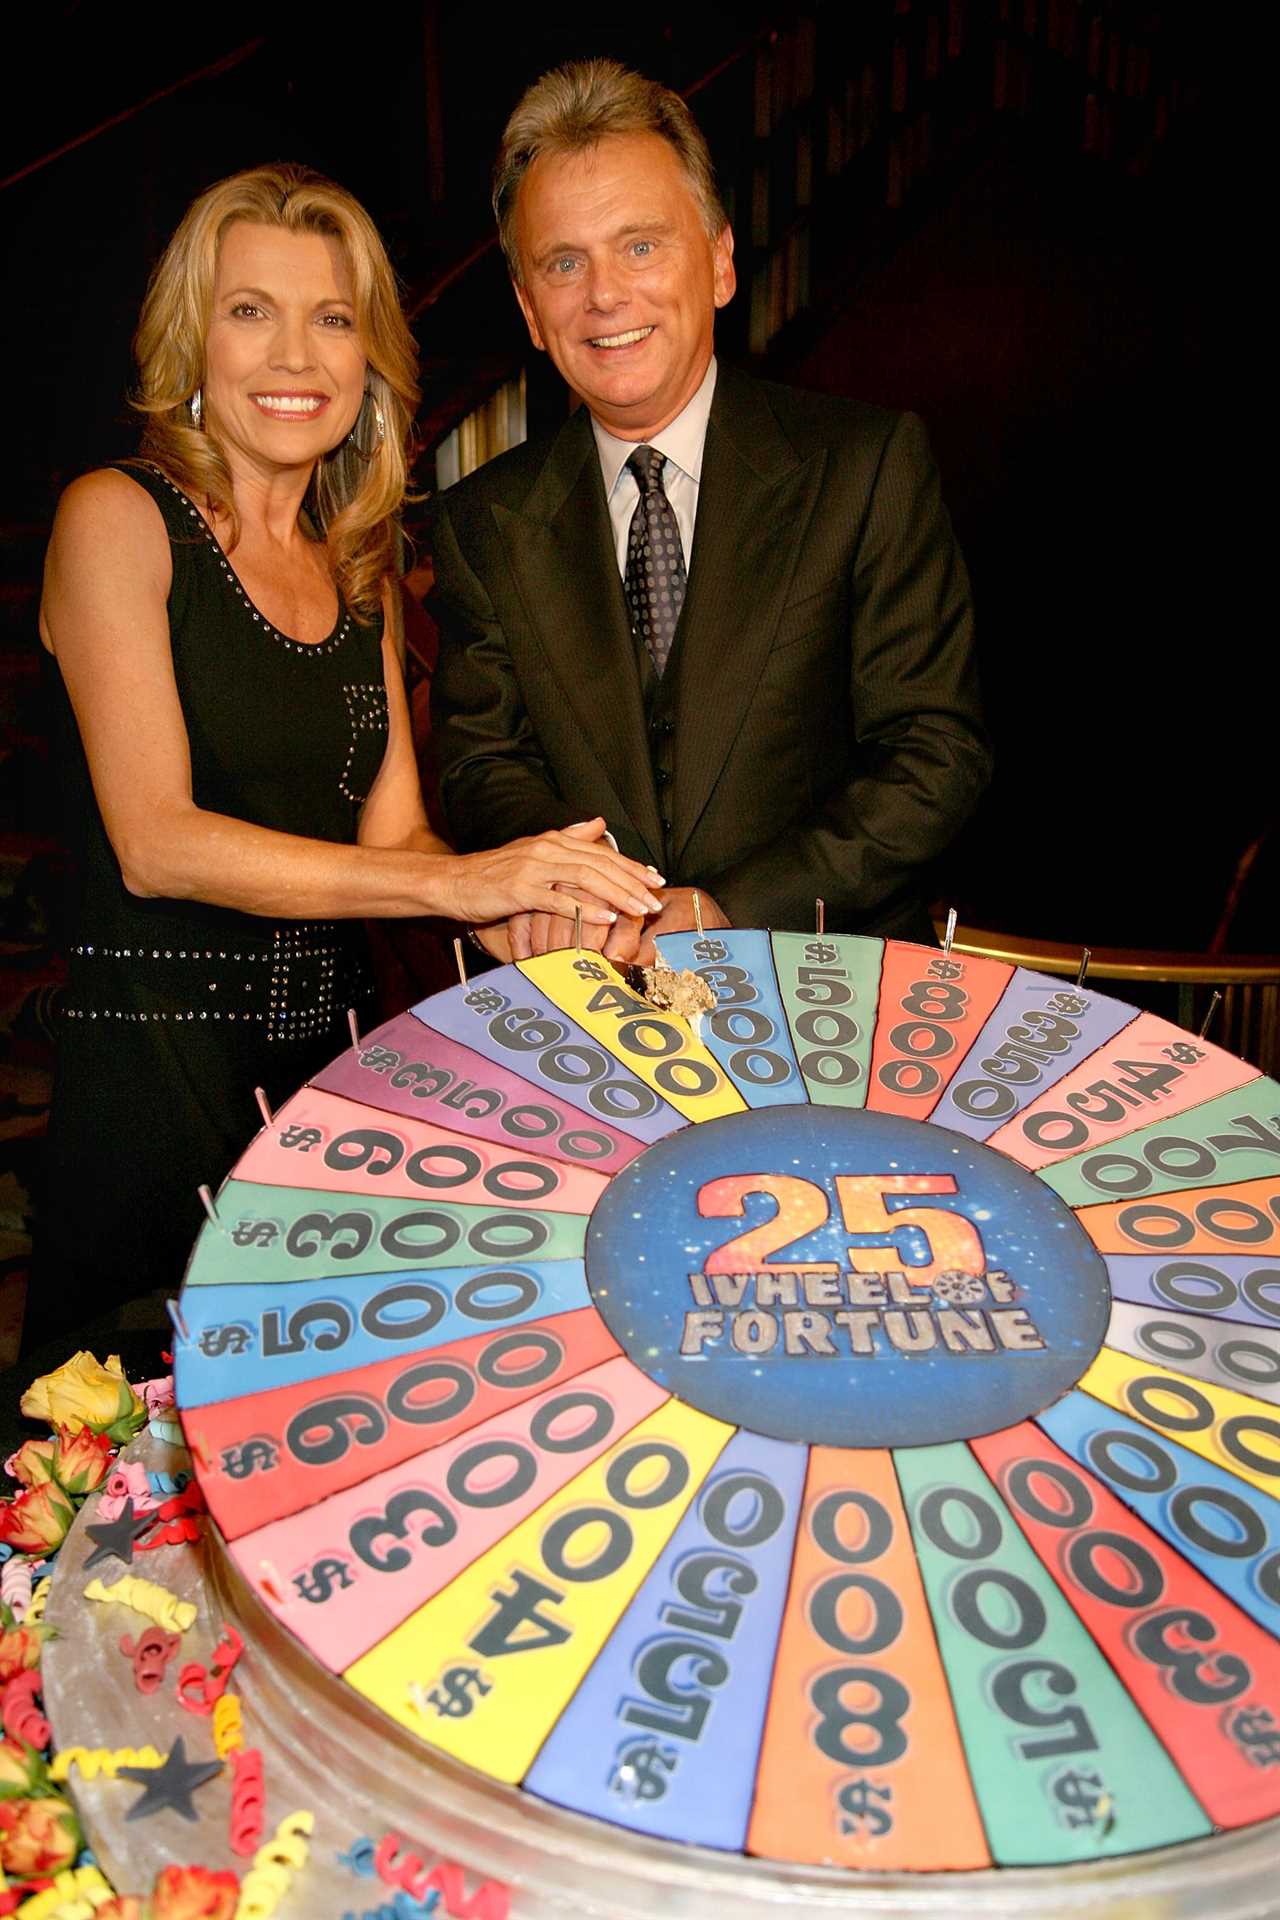 Who are the hosts of Wheel of Fortune?